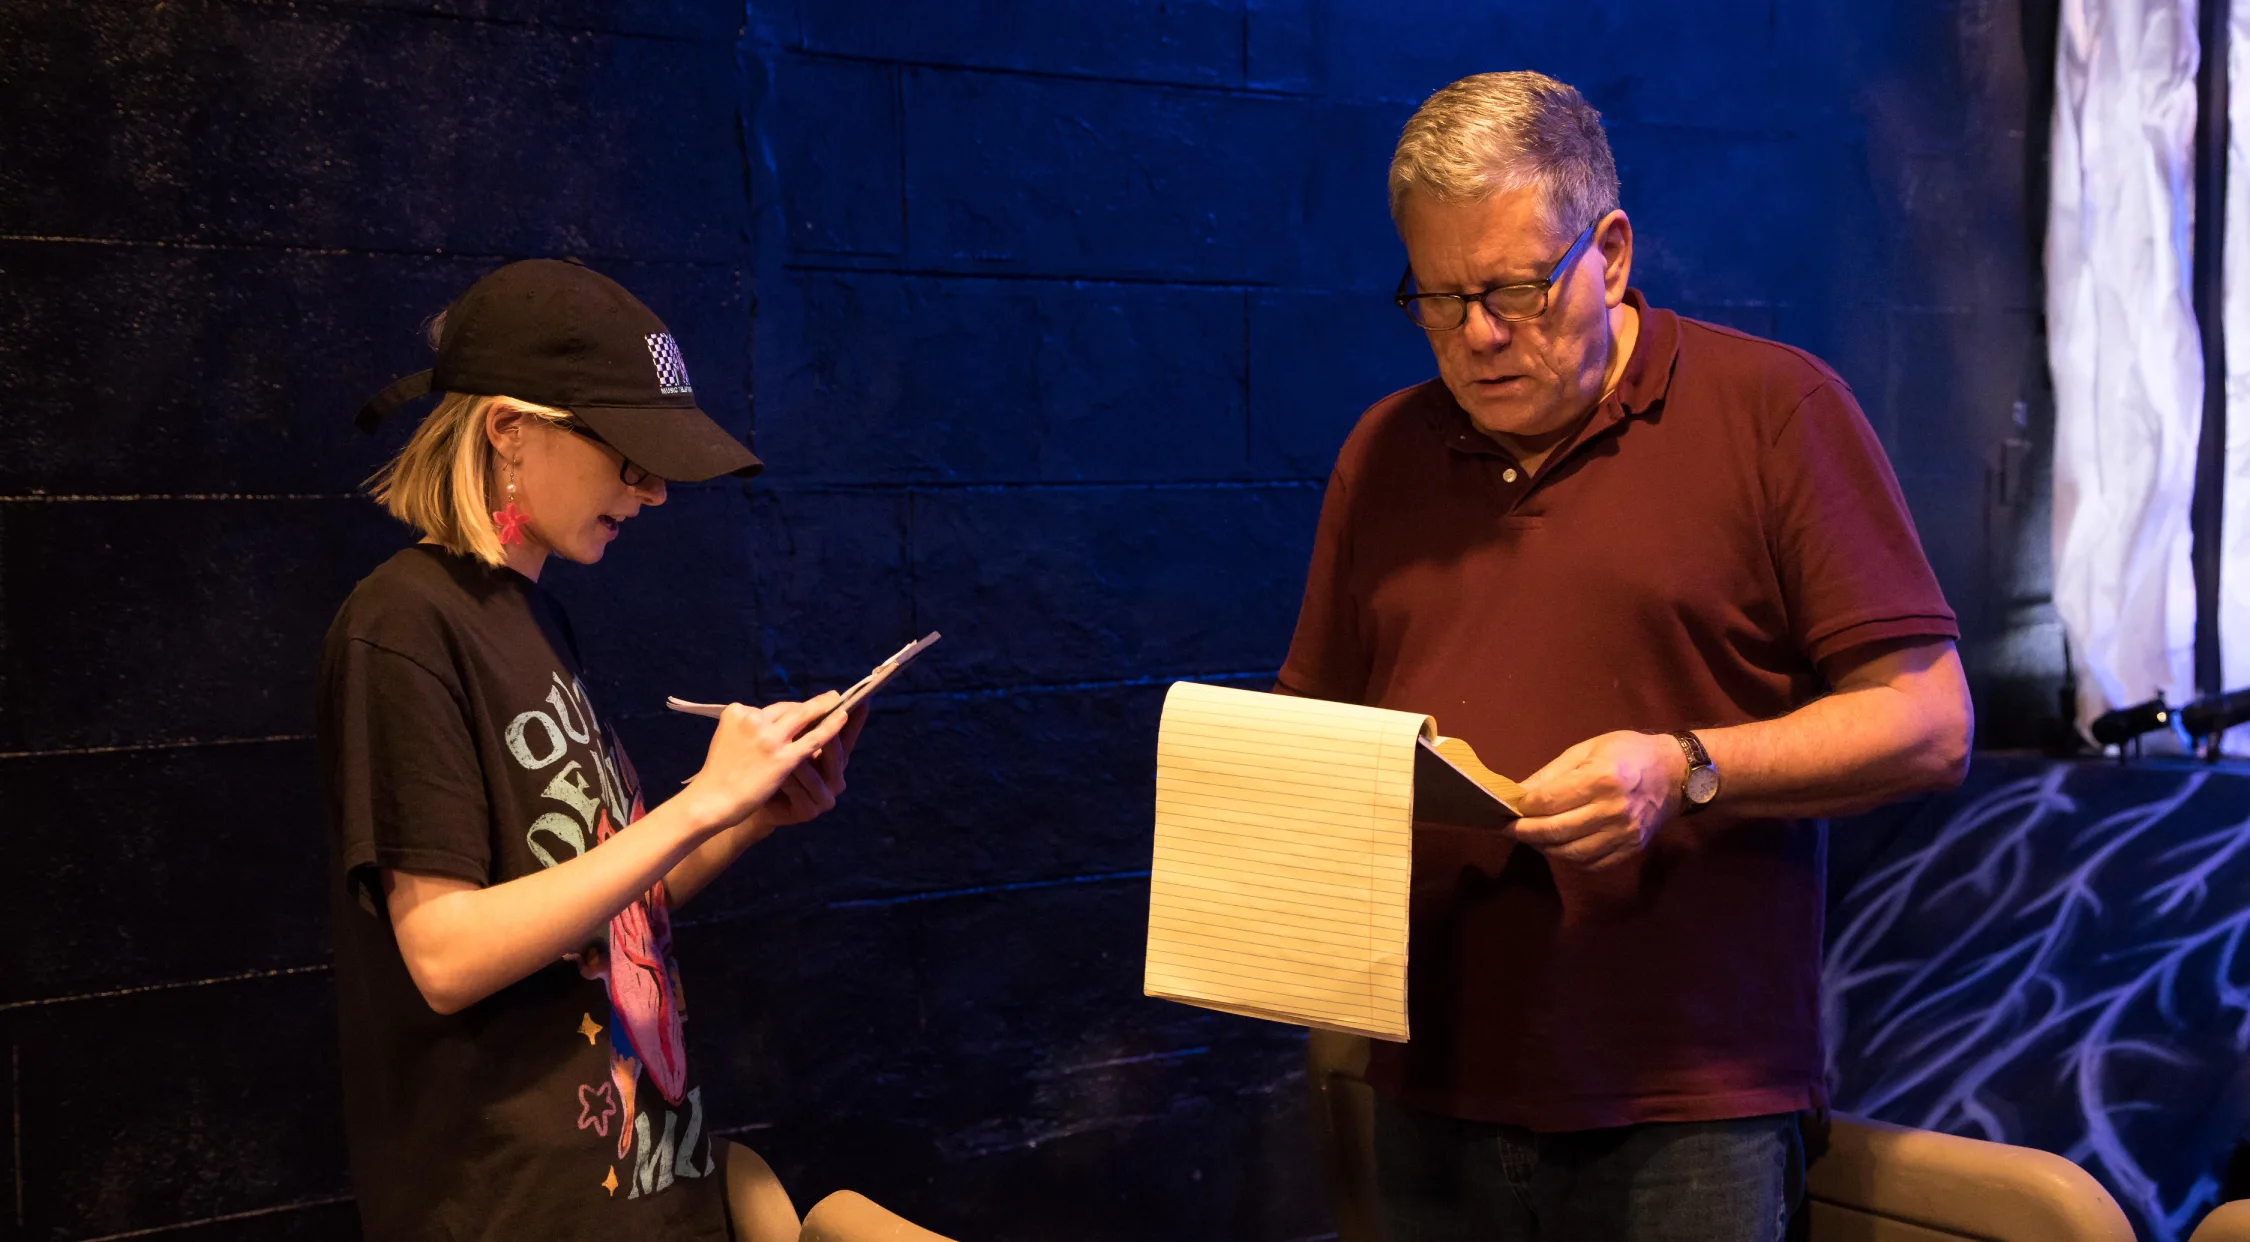 Two people behind stage reading through notes and material.